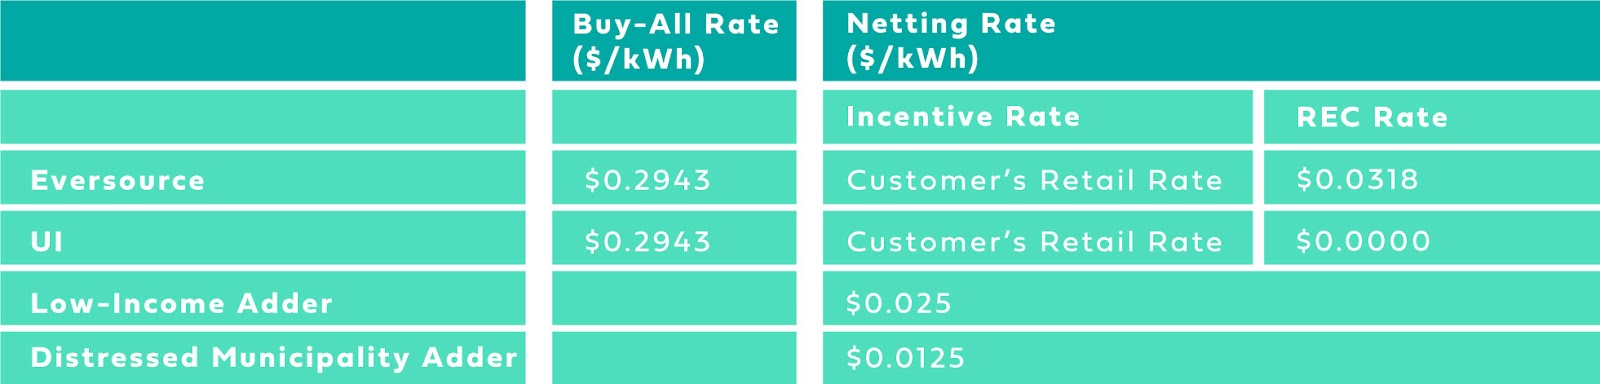 rate chart for residential renewable energy solutions